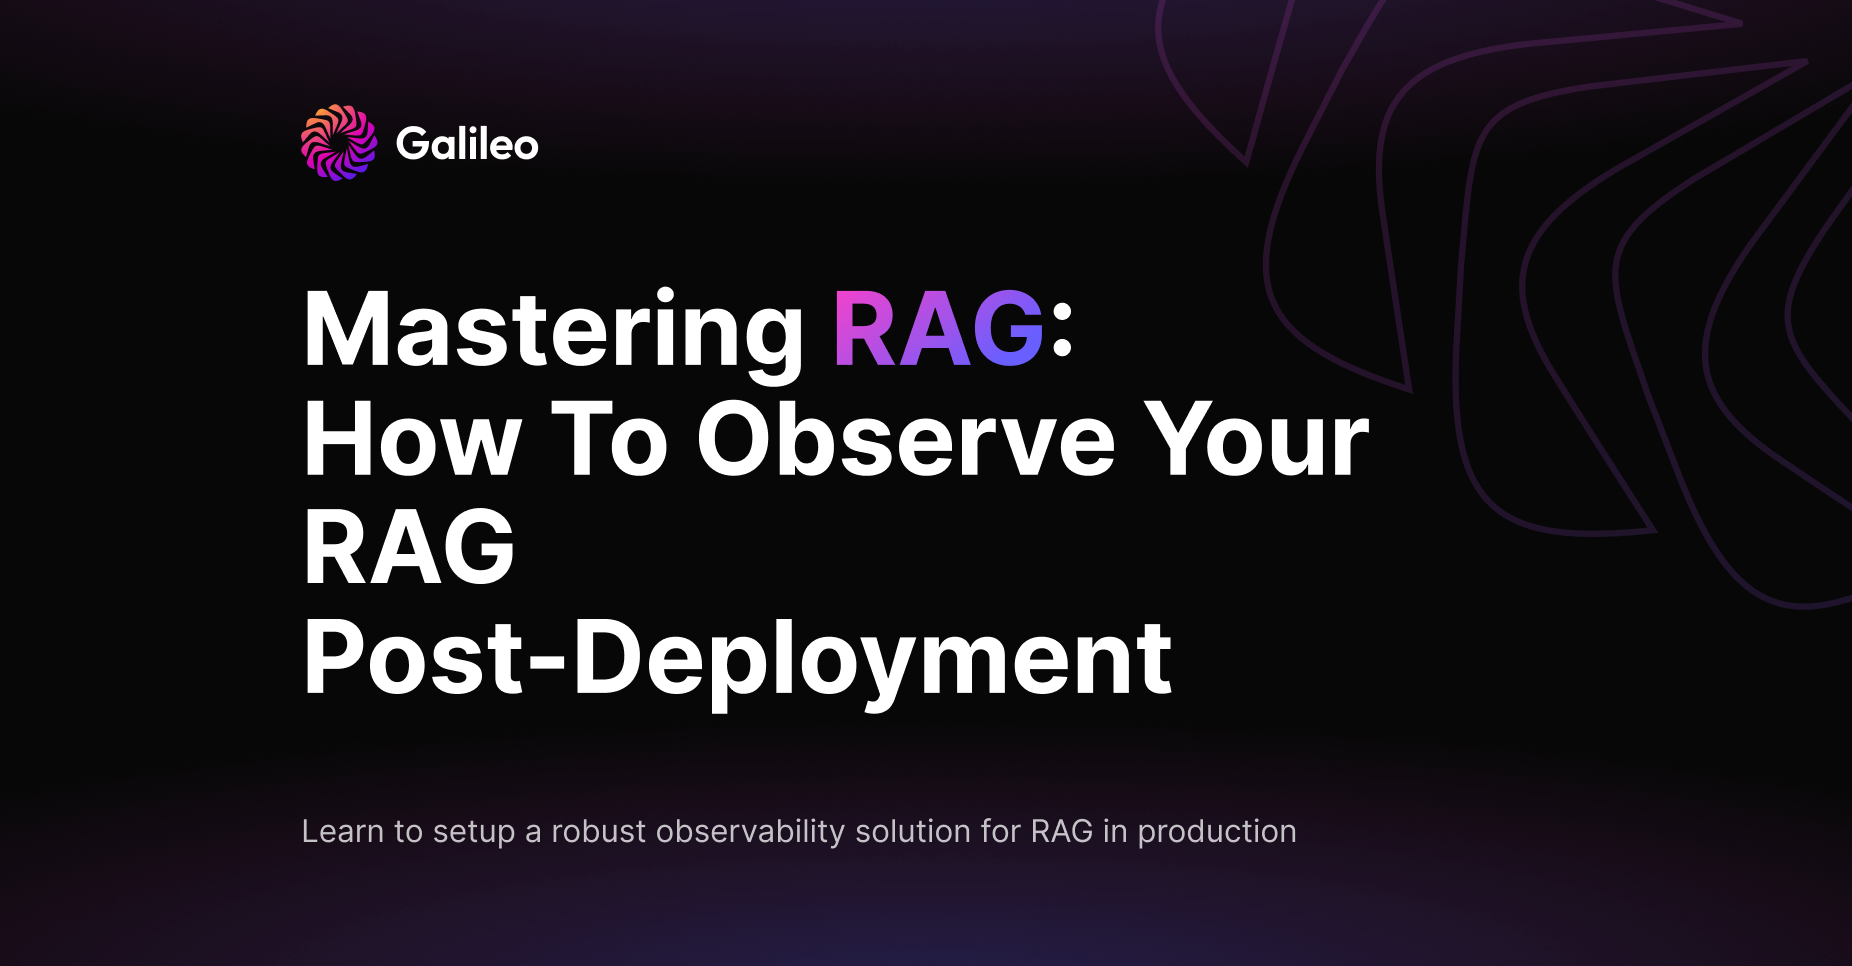 Mastering RAG: How To Observe Your RAG Post-Deployment